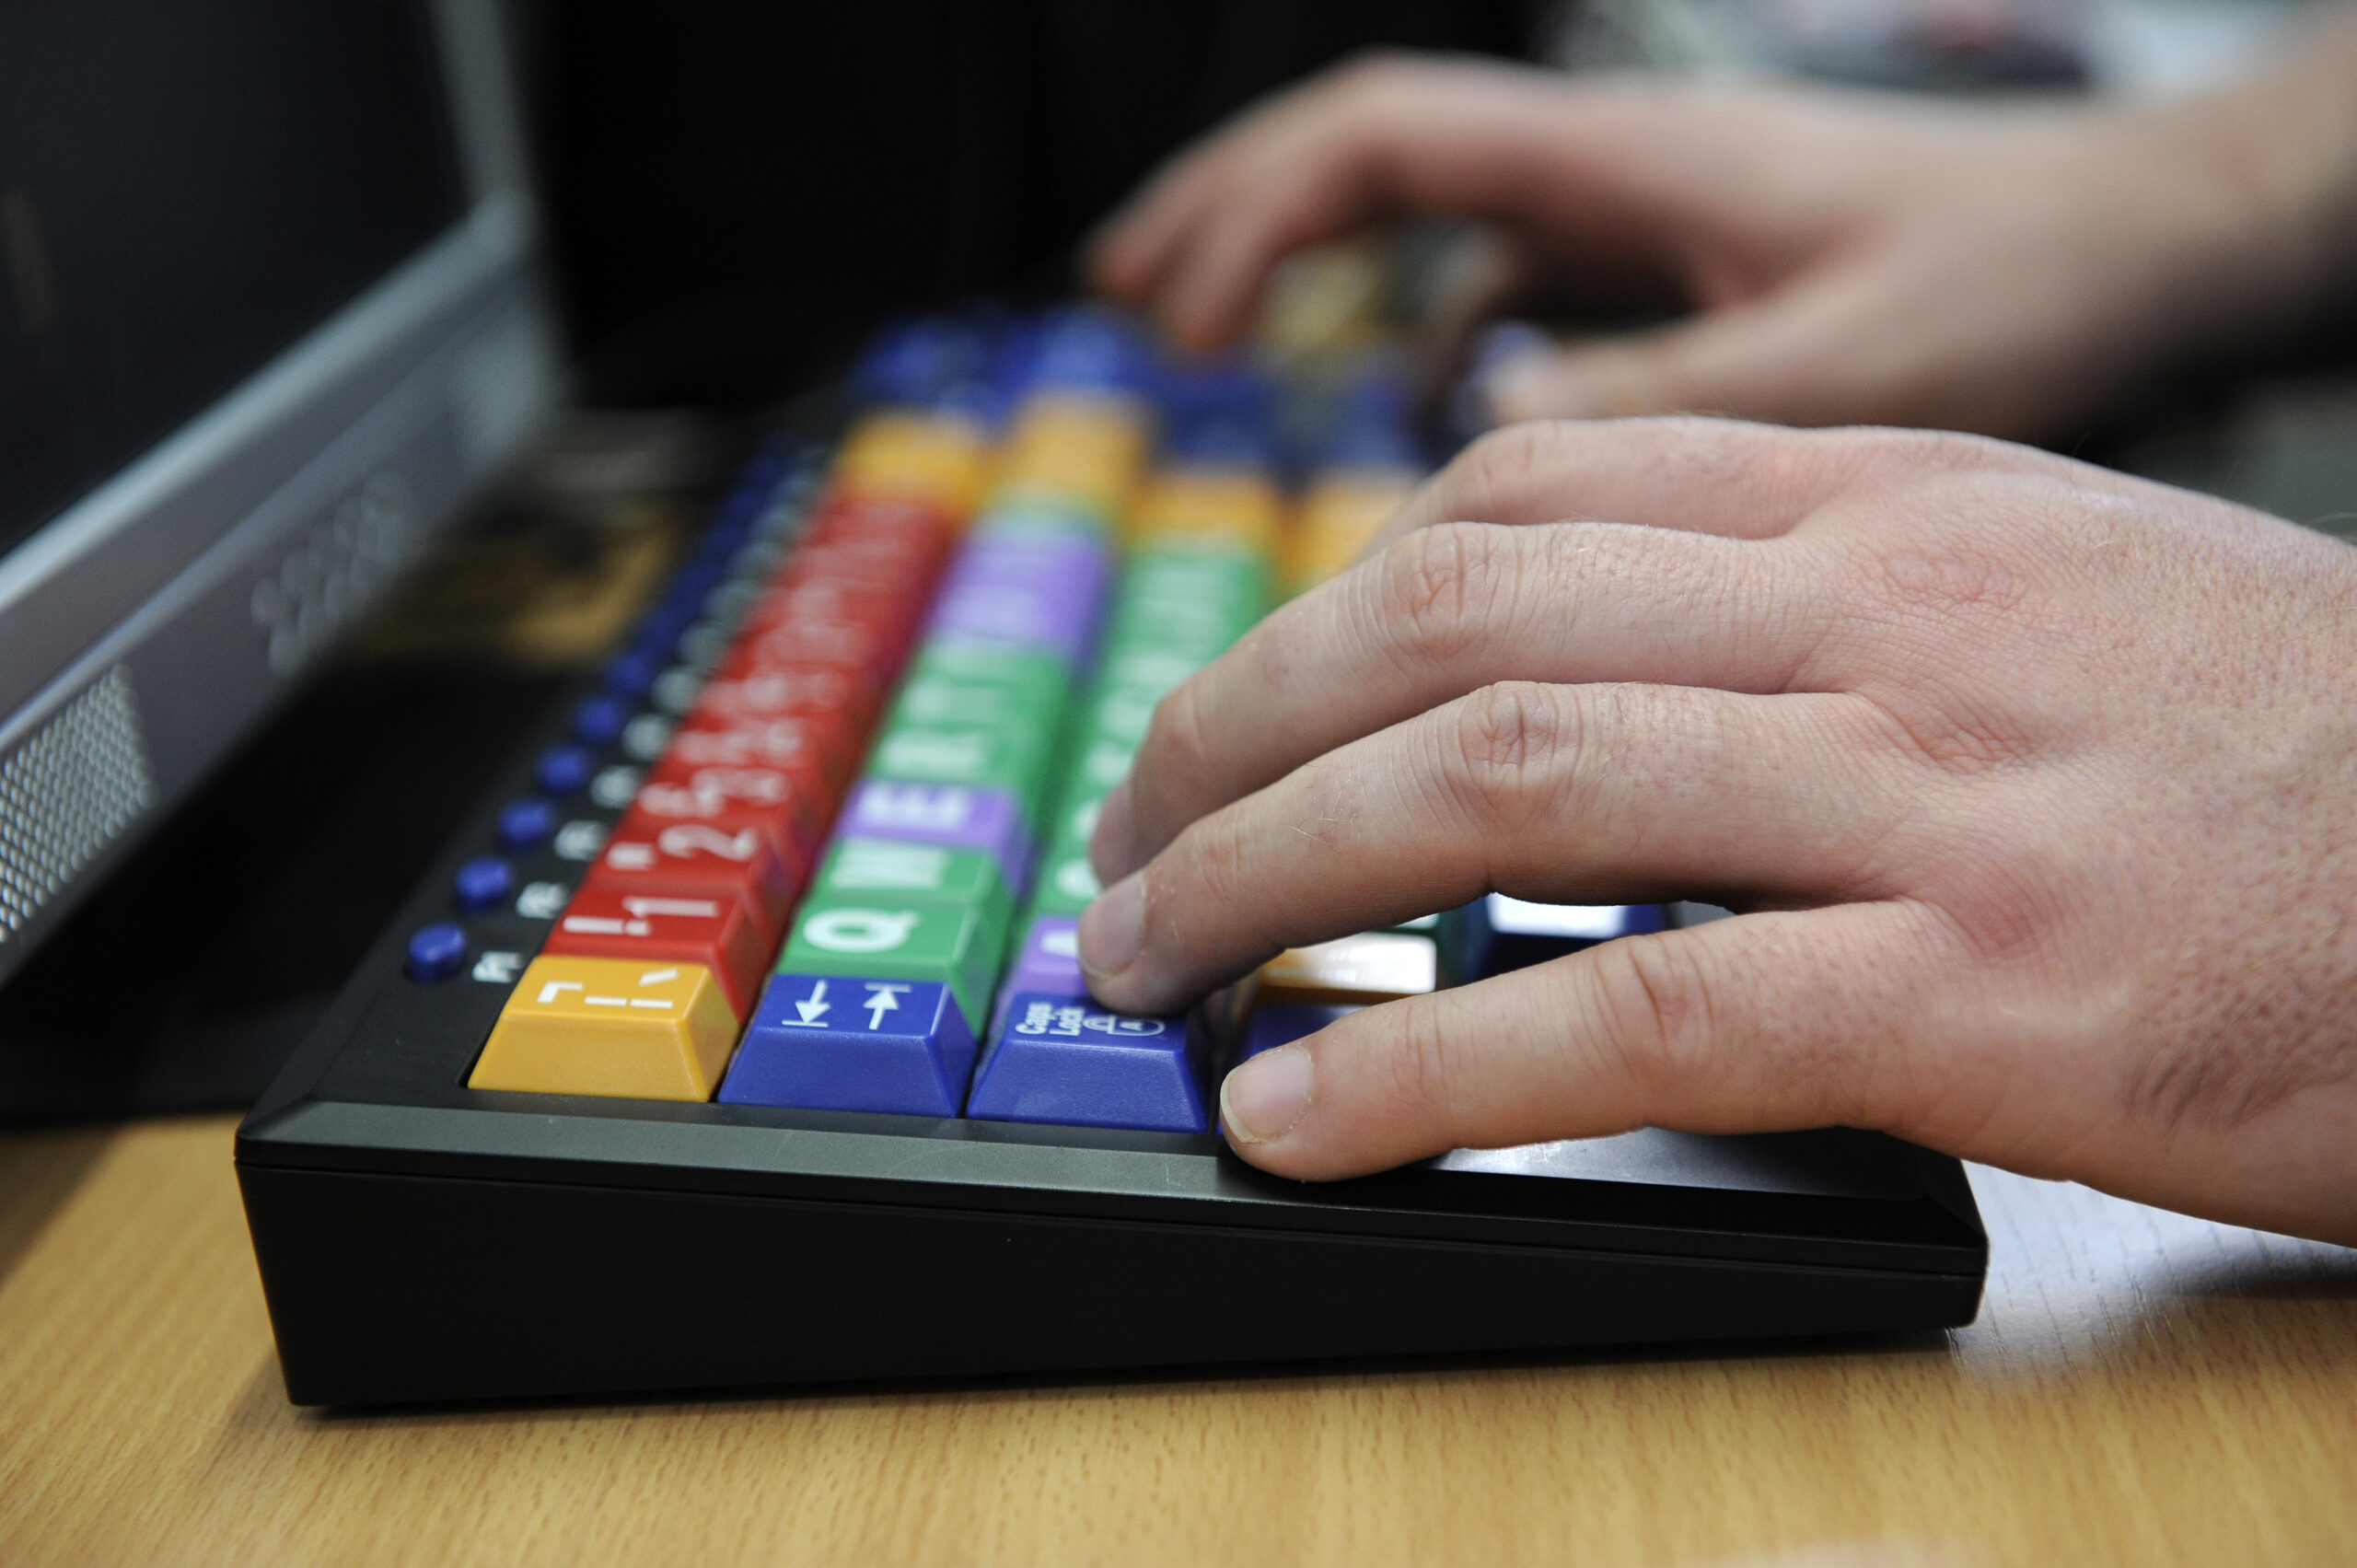 An image of two hands typing on a computer keyboard for visually impaired people.